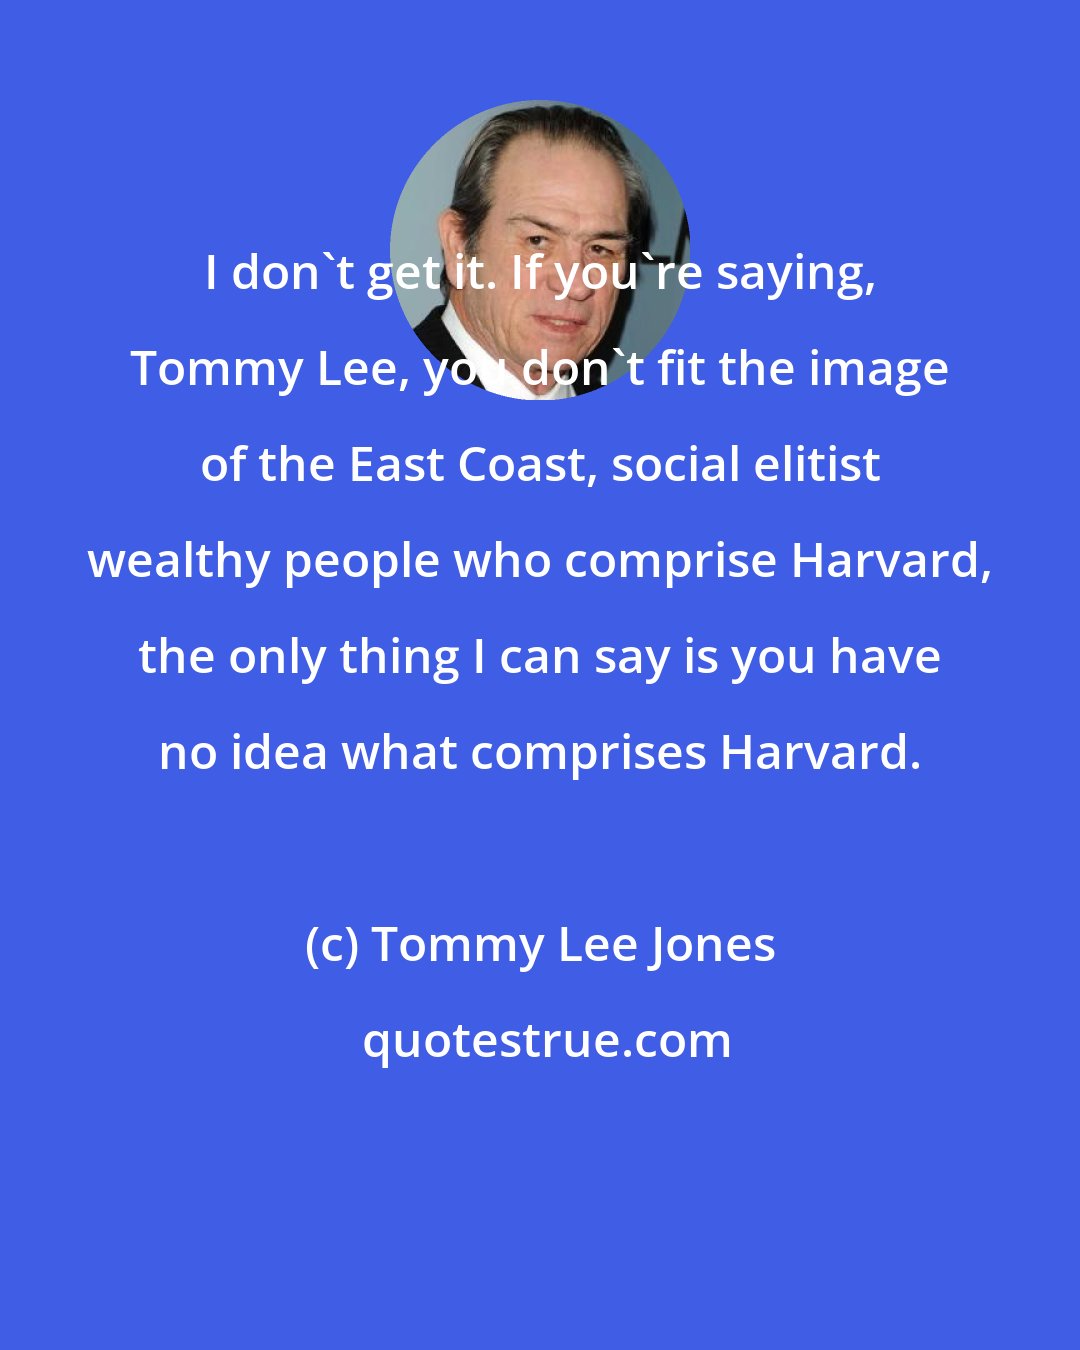 Tommy Lee Jones: I don't get it. If you're saying, Tommy Lee, you don't fit the image of the East Coast, social elitist wealthy people who comprise Harvard, the only thing I can say is you have no idea what comprises Harvard.